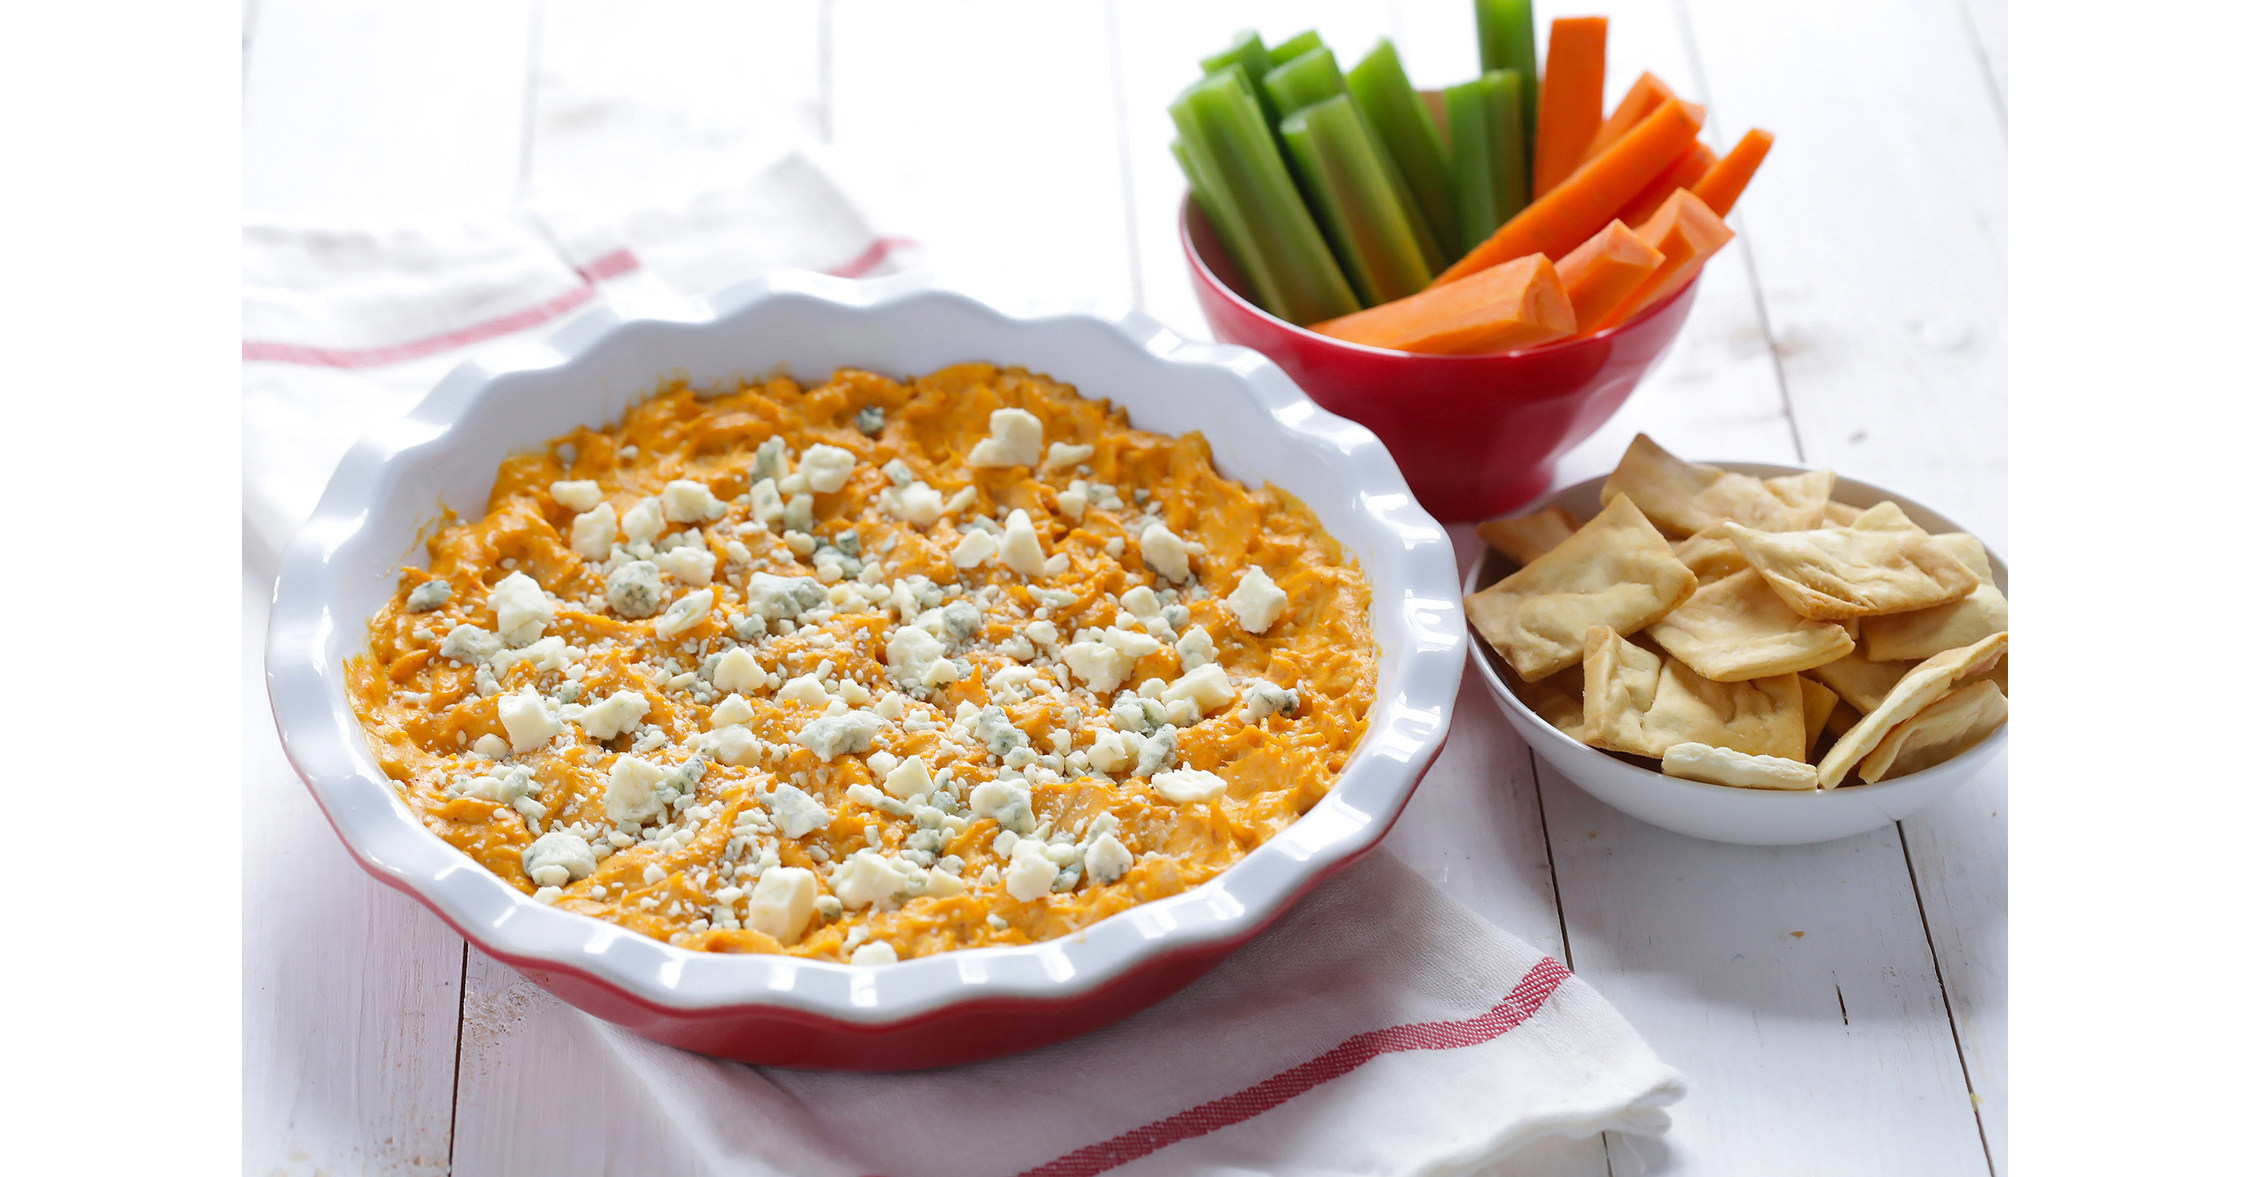 Dig Into 7 Game-Winning Dips